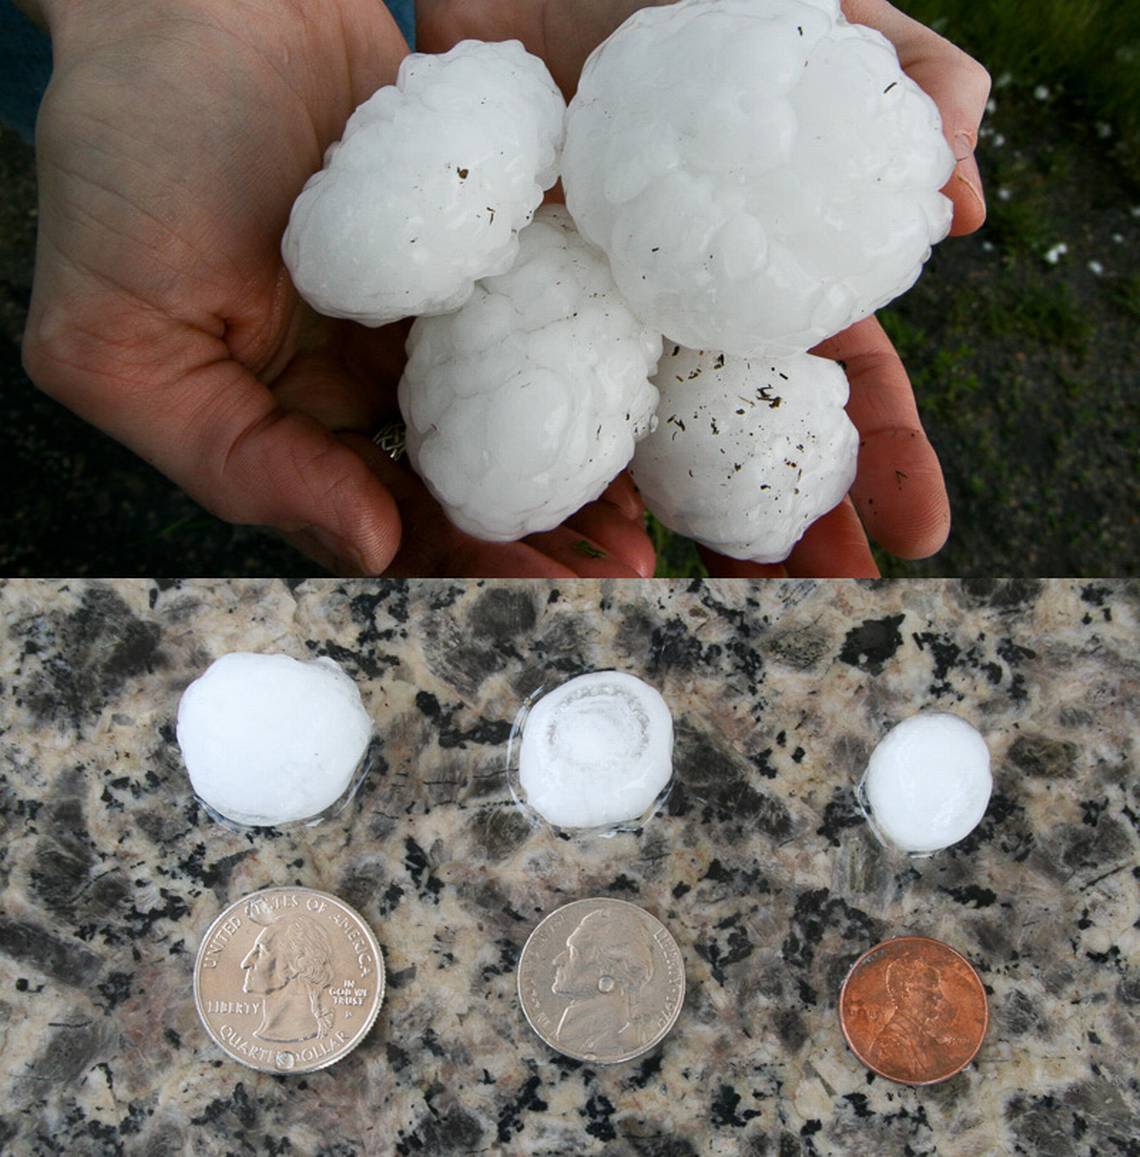 Storm updates: Hail up to golf ball size in parts of Tarrant County; tornado watch expires